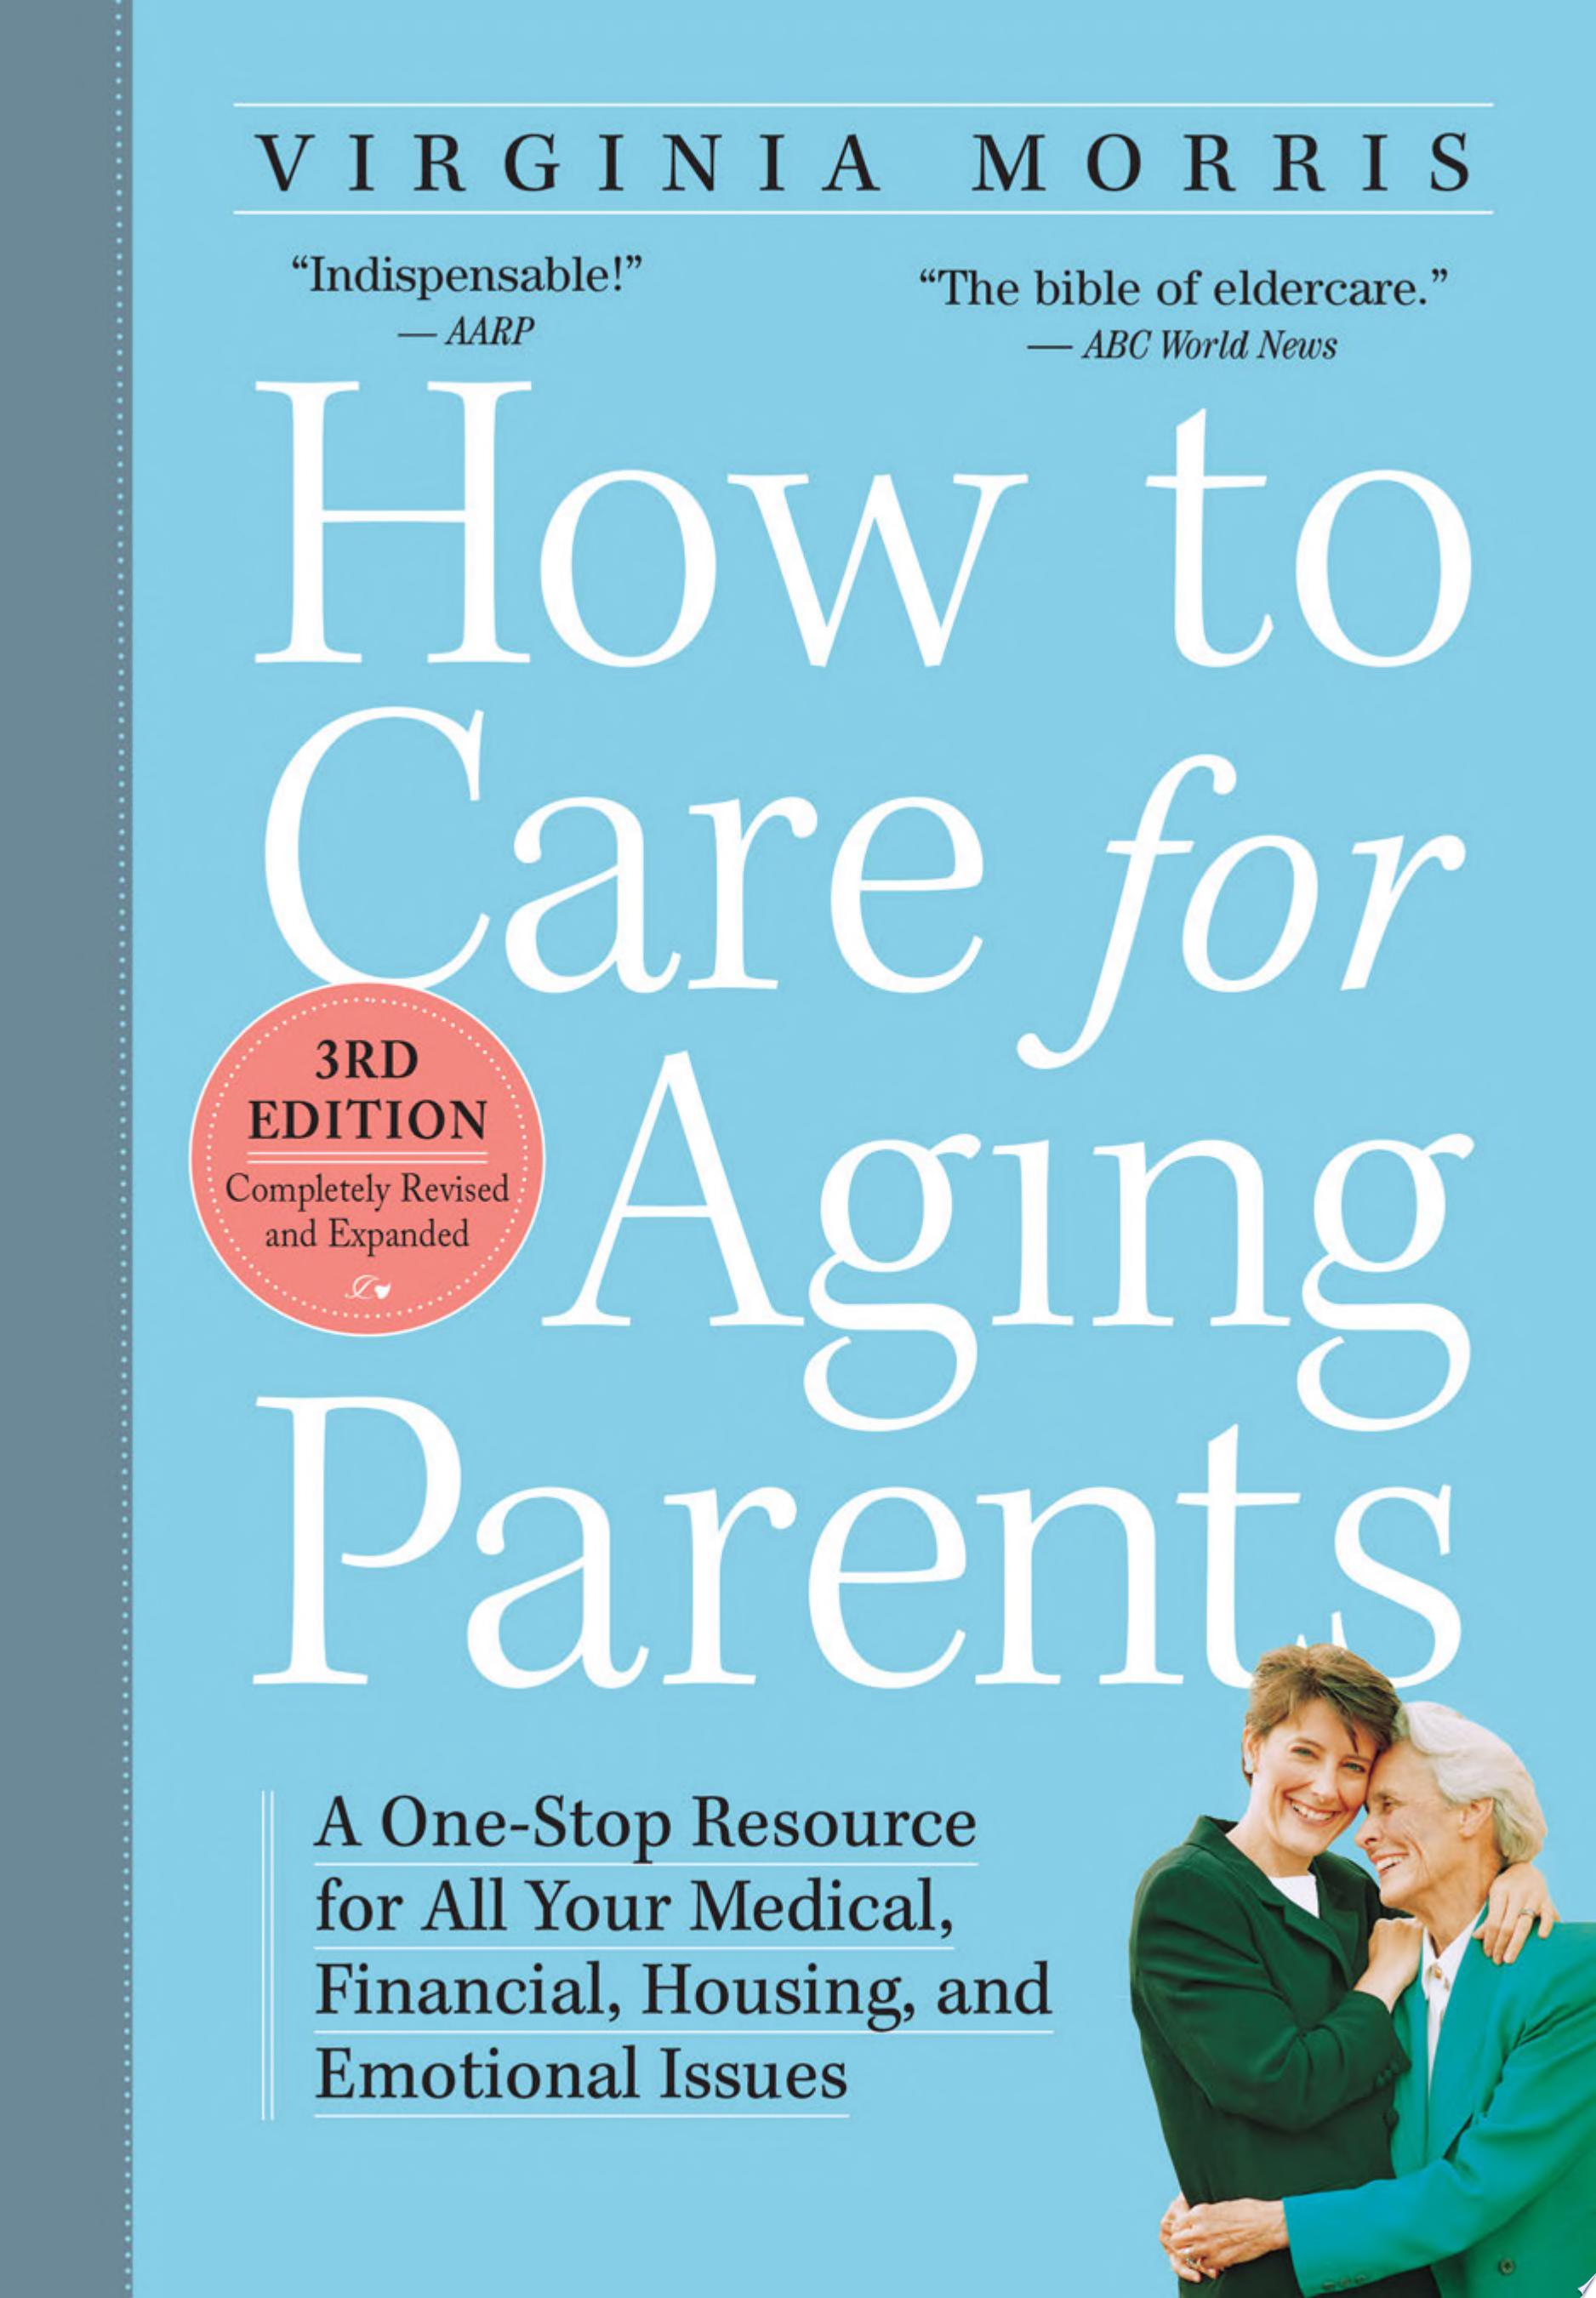 Image for "How to Care for Aging Parents, 3rd Edition"